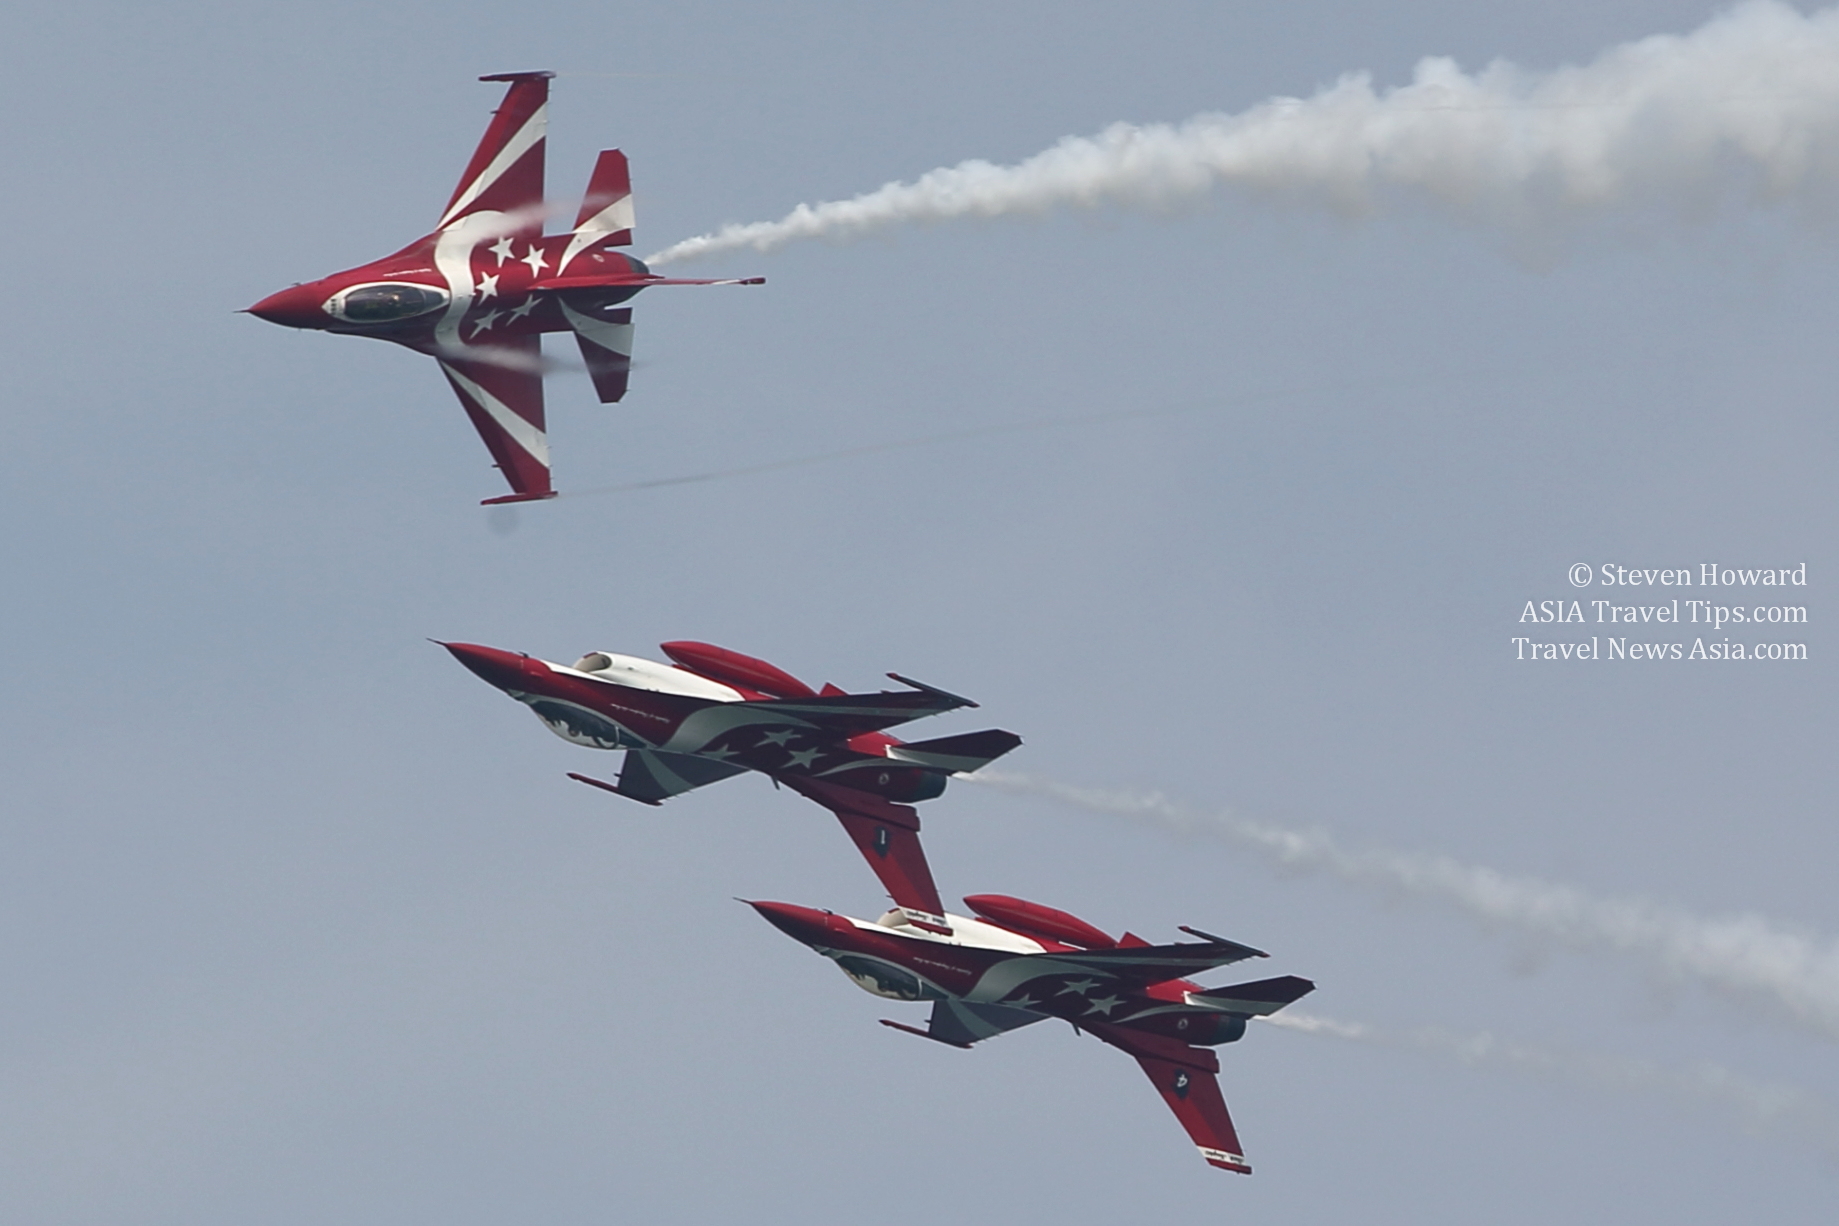 Jets performing at Singapore Airshow 2014. Picture by Steven Howard of TravelNewsAsia.com Click to enlarge.